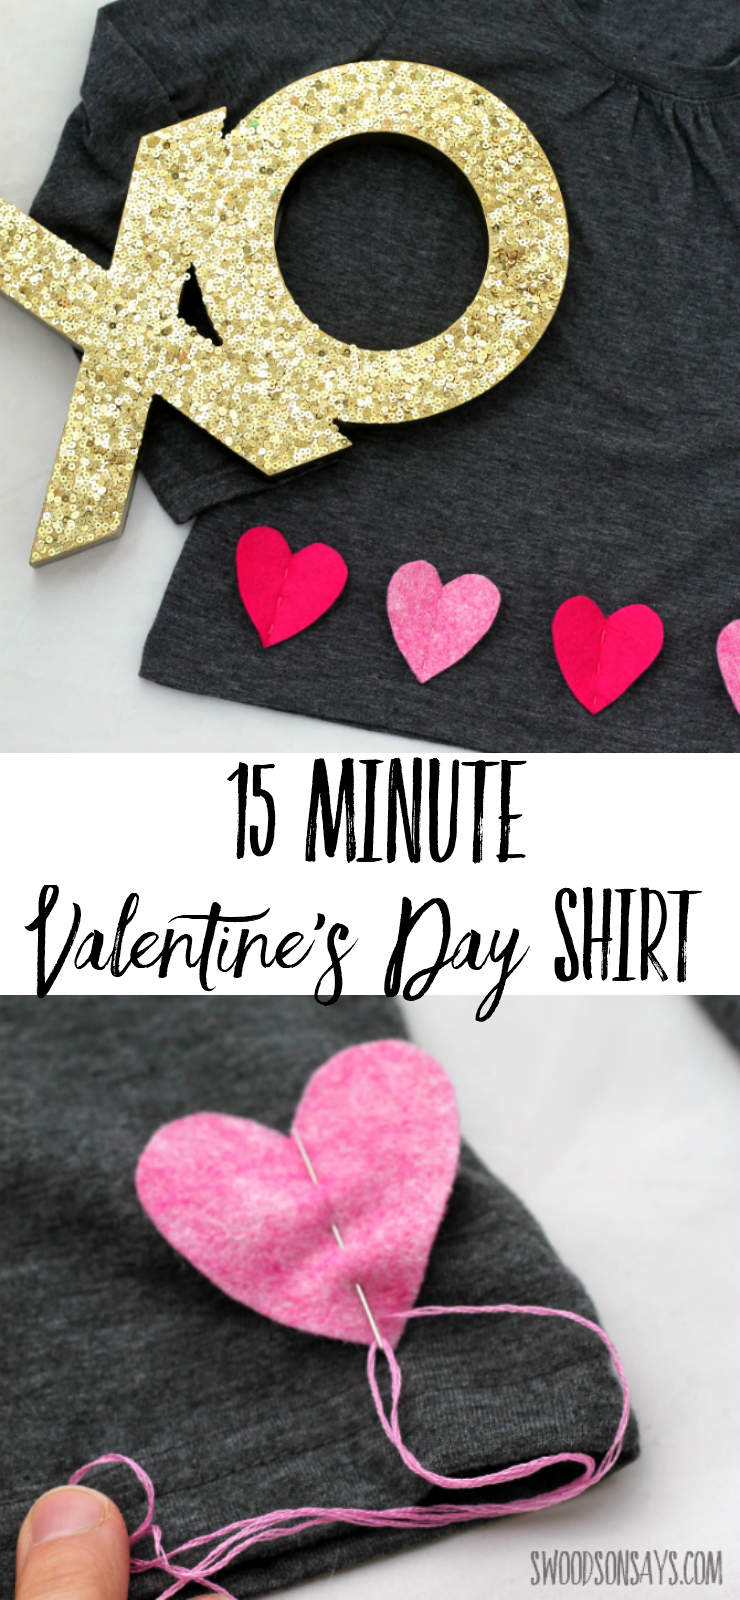 Looking for a DIY Valentine's Day shirt? This wool felt applique tutorial only takes 15 minutes! Super easy craft with a free printable template to download, you can make it the morning before school. #valentinesday #valentinesdayshirt #valentinesdaycraft